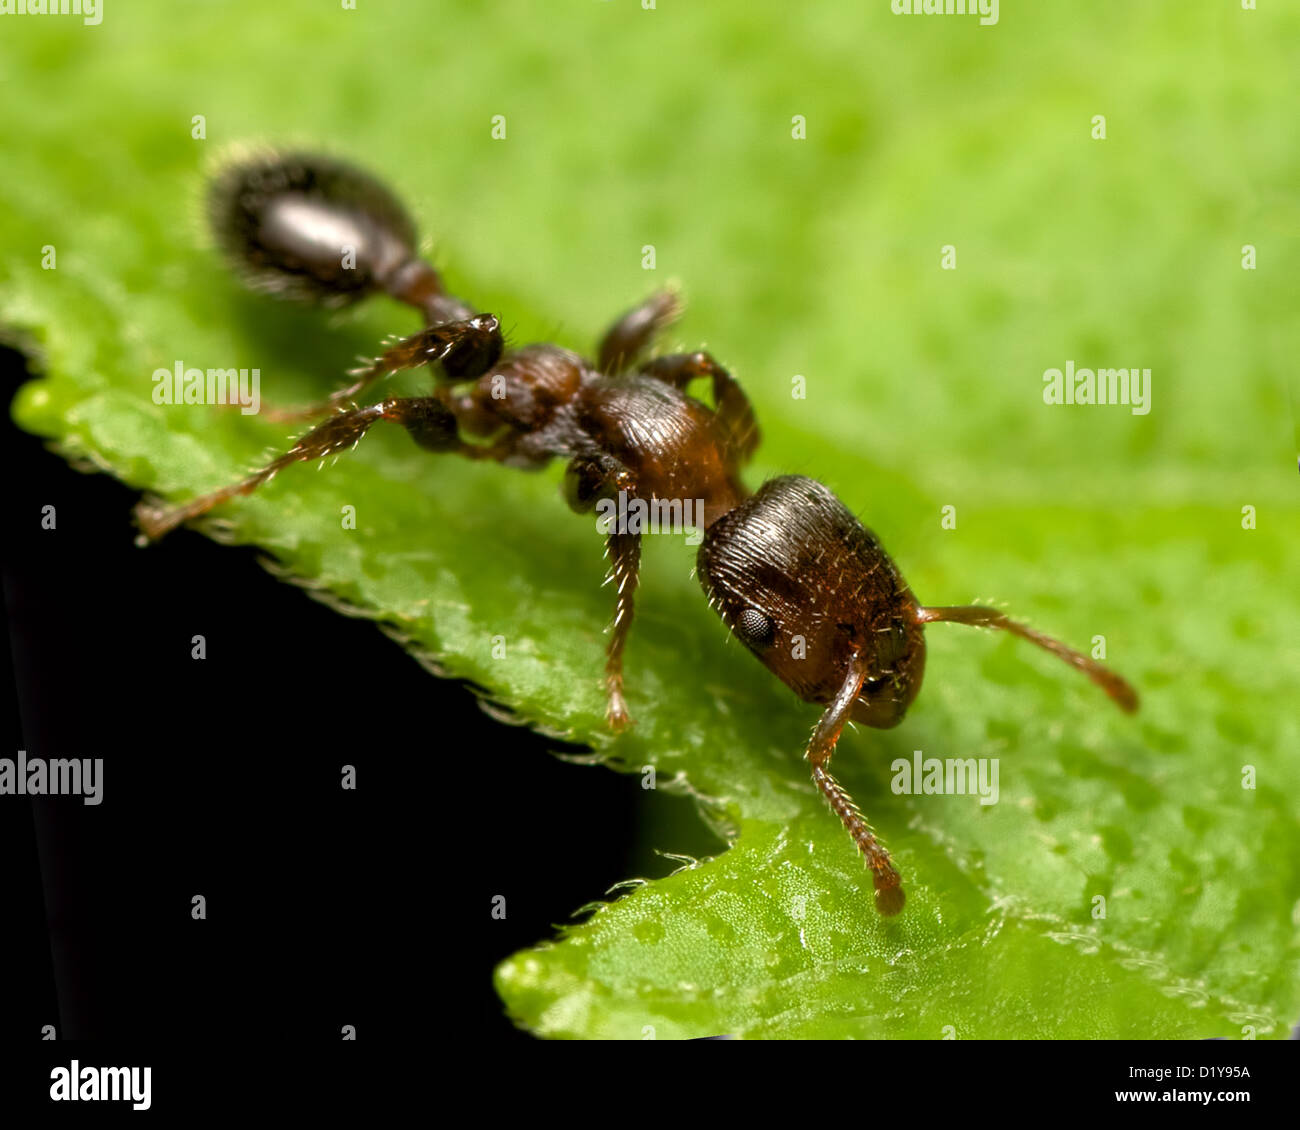 a brown ant walking on a green leaf Stock Photo